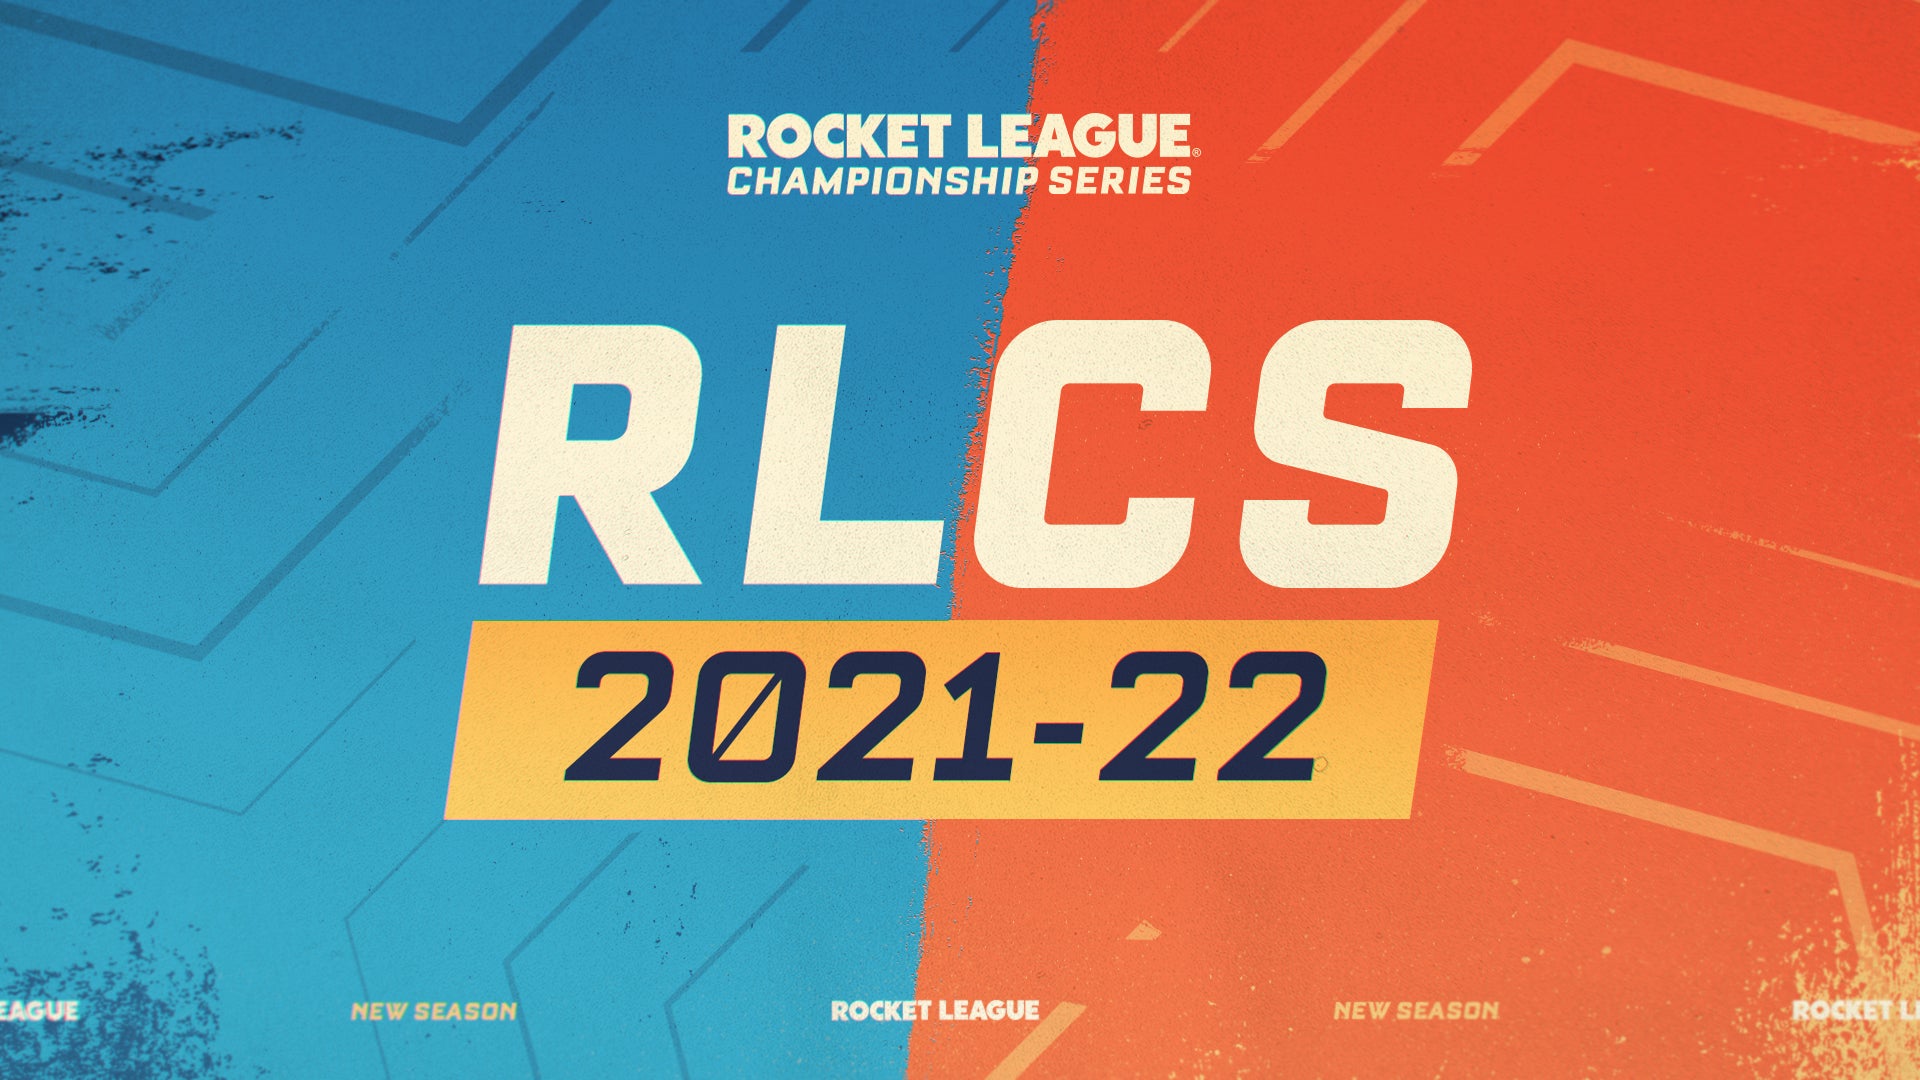 Major Changes Coming to the RLCS for the 2021-2022 Season